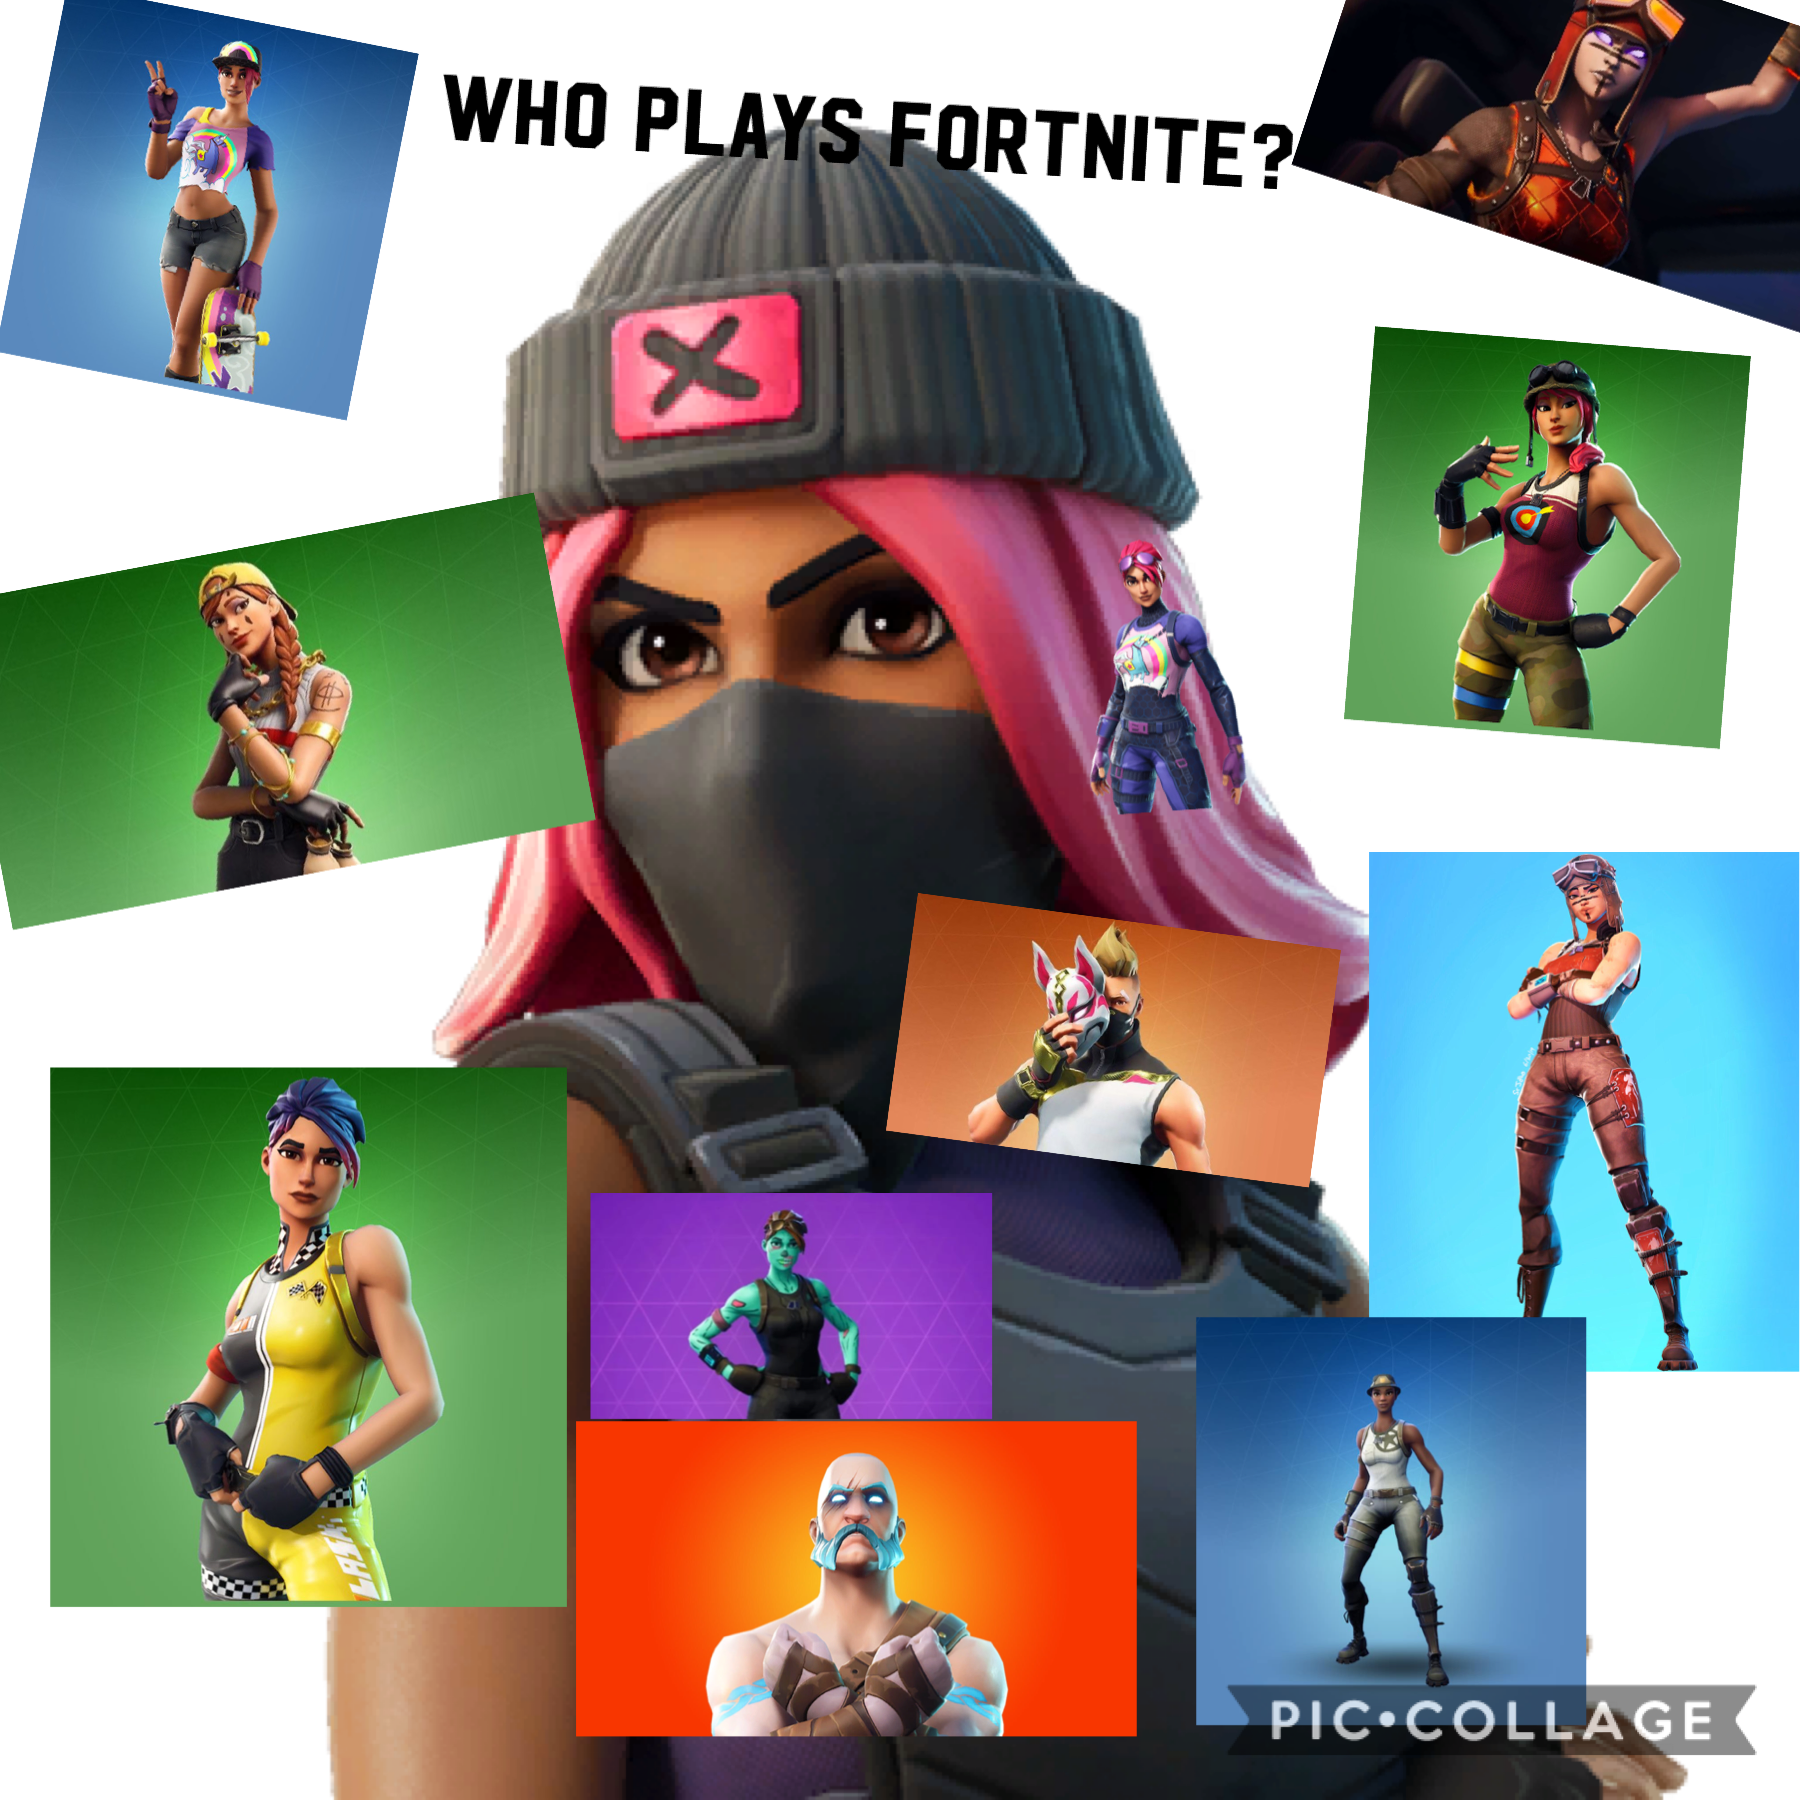 Who plays fortnite